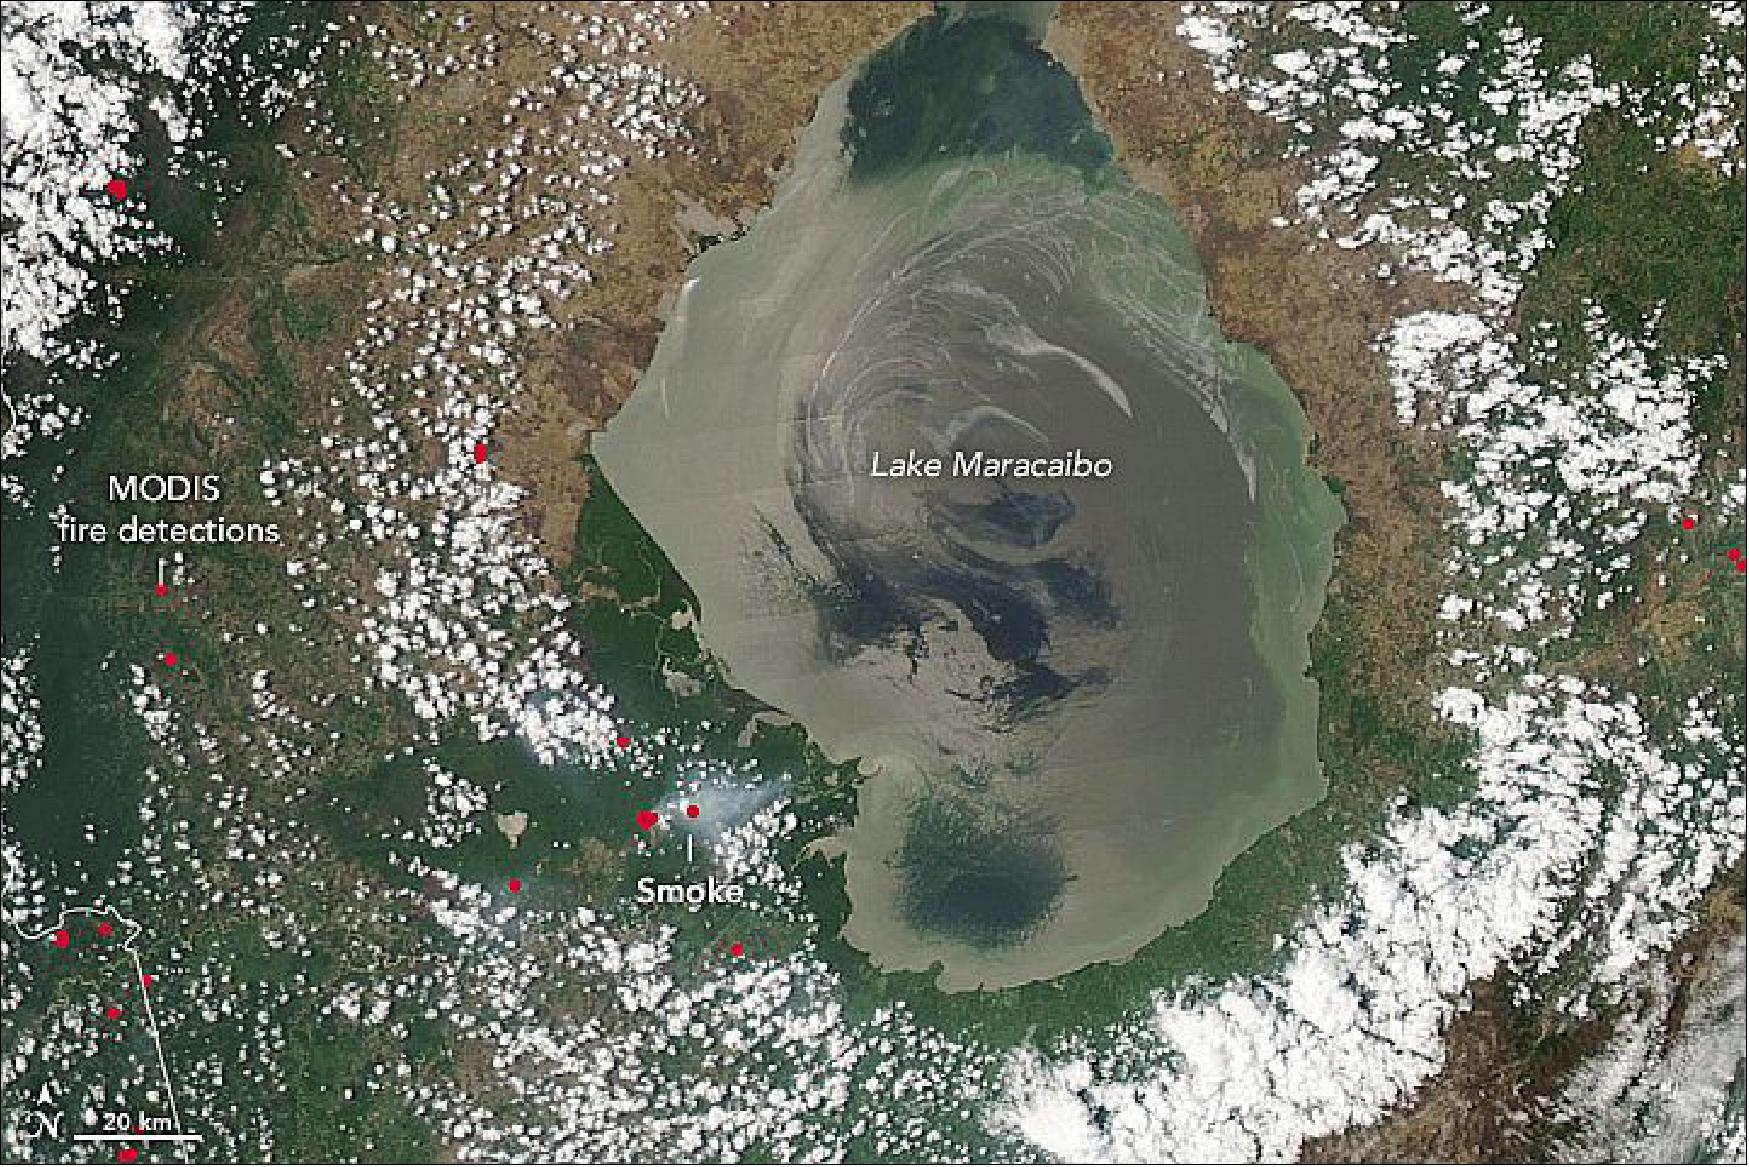 Figure 81: MODIS image of 26 April 2020 showing the smoldering fire and smoke (image credit: NASA Earth Observatory)